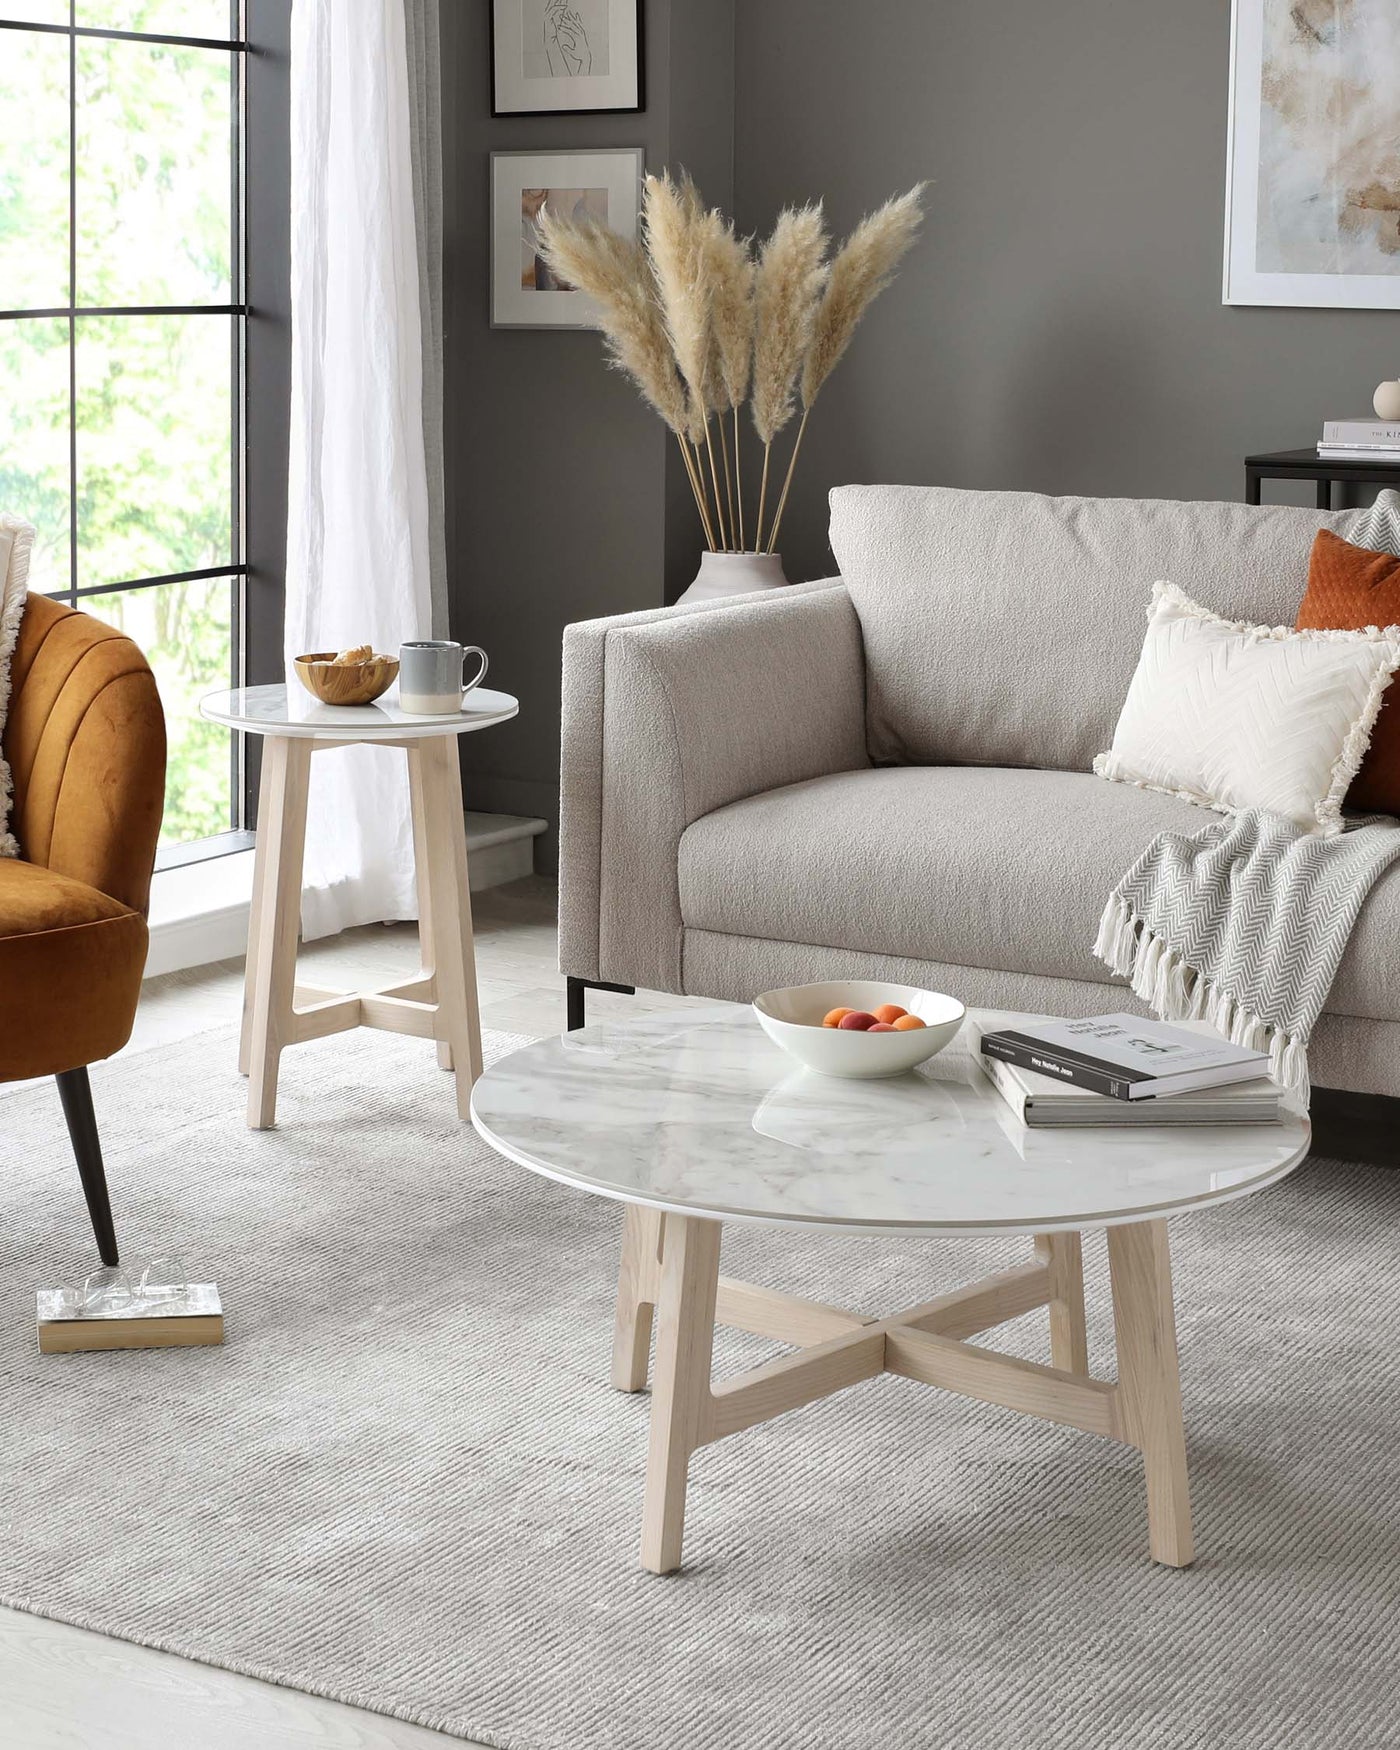 Modern living room setup featuring a light grey fabric sofa with plush cushions, a mid-century modern amber velvet armchair with a curved back and angled wooden legs, and a round white marble coffee table with a unique wooden cross-base design. A simplistic round white side table with three wooden legs is also present, completing the contemporary aesthetic. The space is tied together with a textured grey area rug.